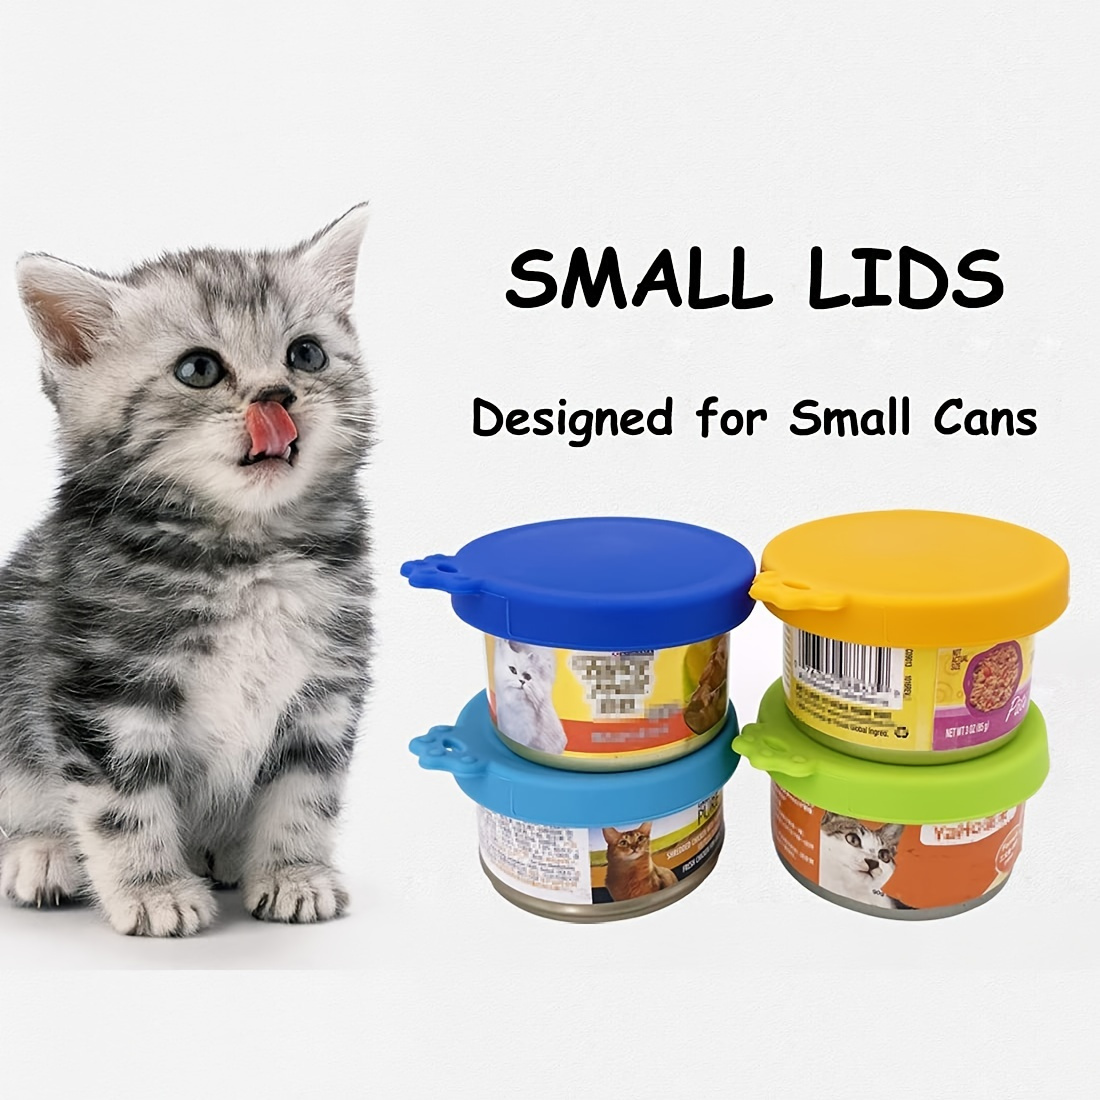 

4pcs Silicone Cat Food Can Lids - Keep Your Pet's Food Fresh And Tasty - Fits 3 Oz Cans - Set Of 4